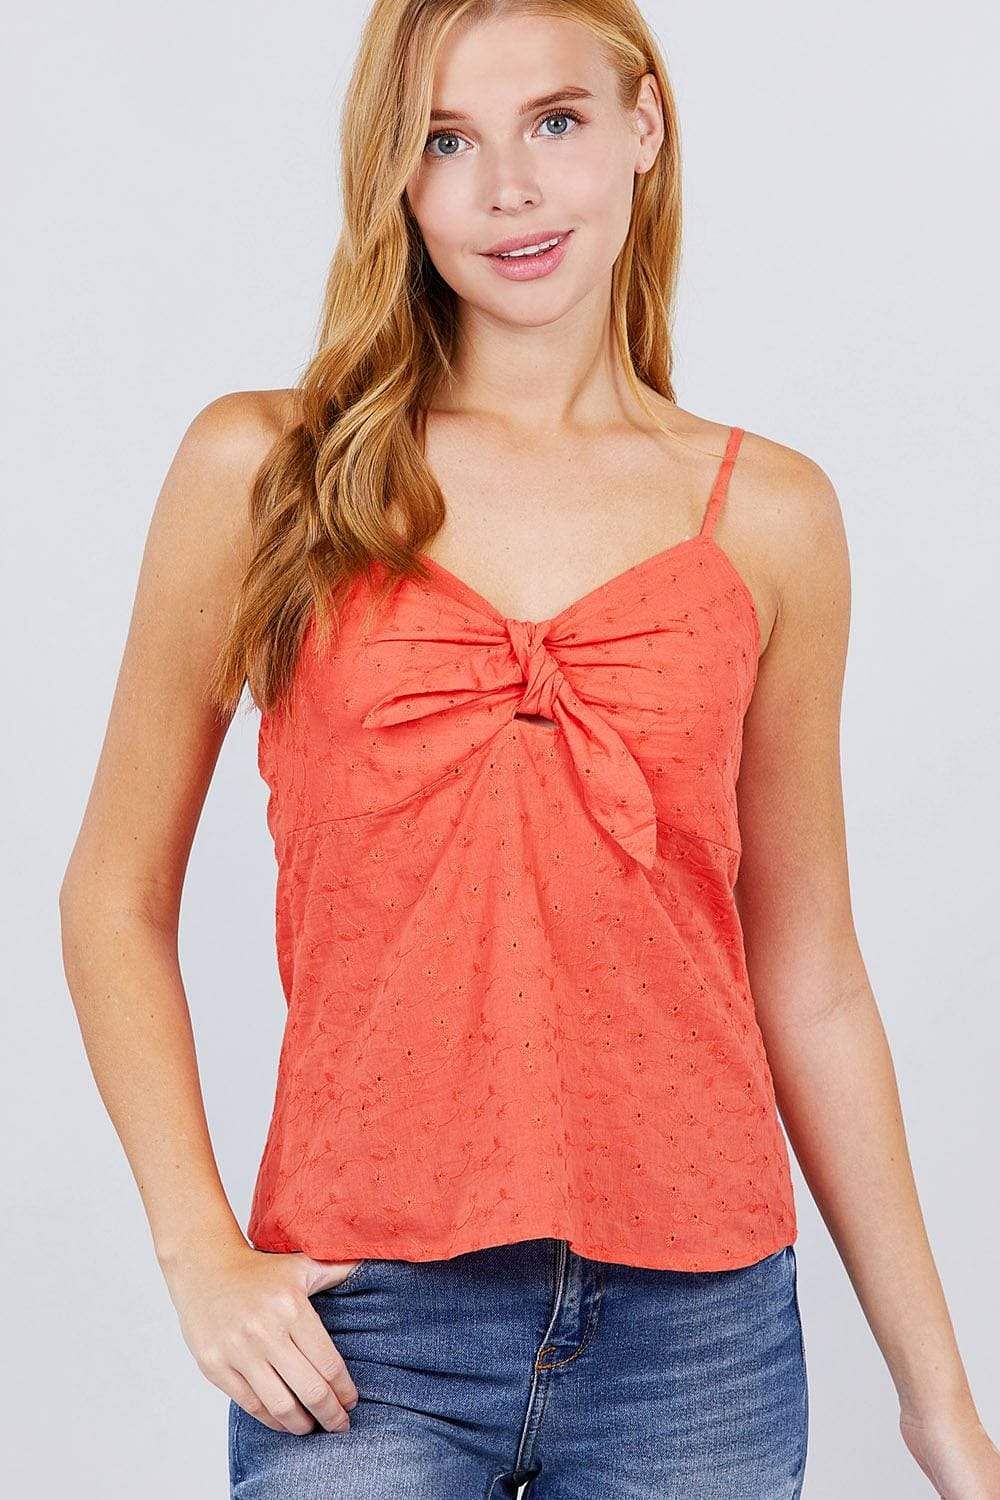 Coral Spaghetti Strap Front Tie V-Neck Cami - Shopping Therapy, LLC Top